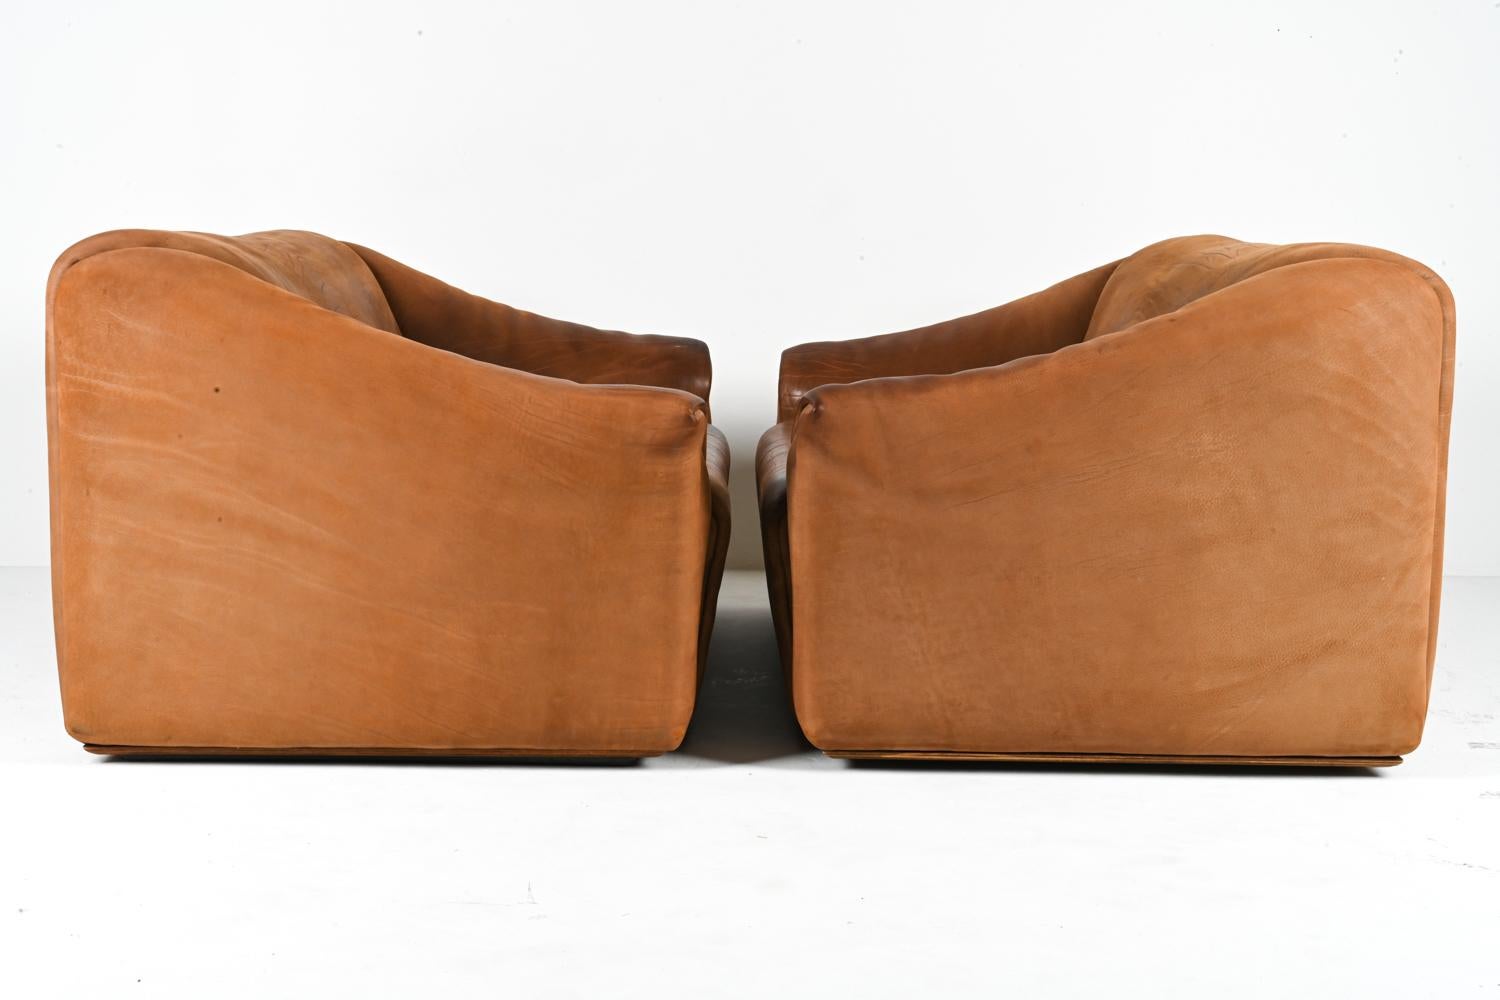 Pair of De Sede DS-47 Two-Seat Sofas in Nubuck Leather, c. 1970's For Sale 8